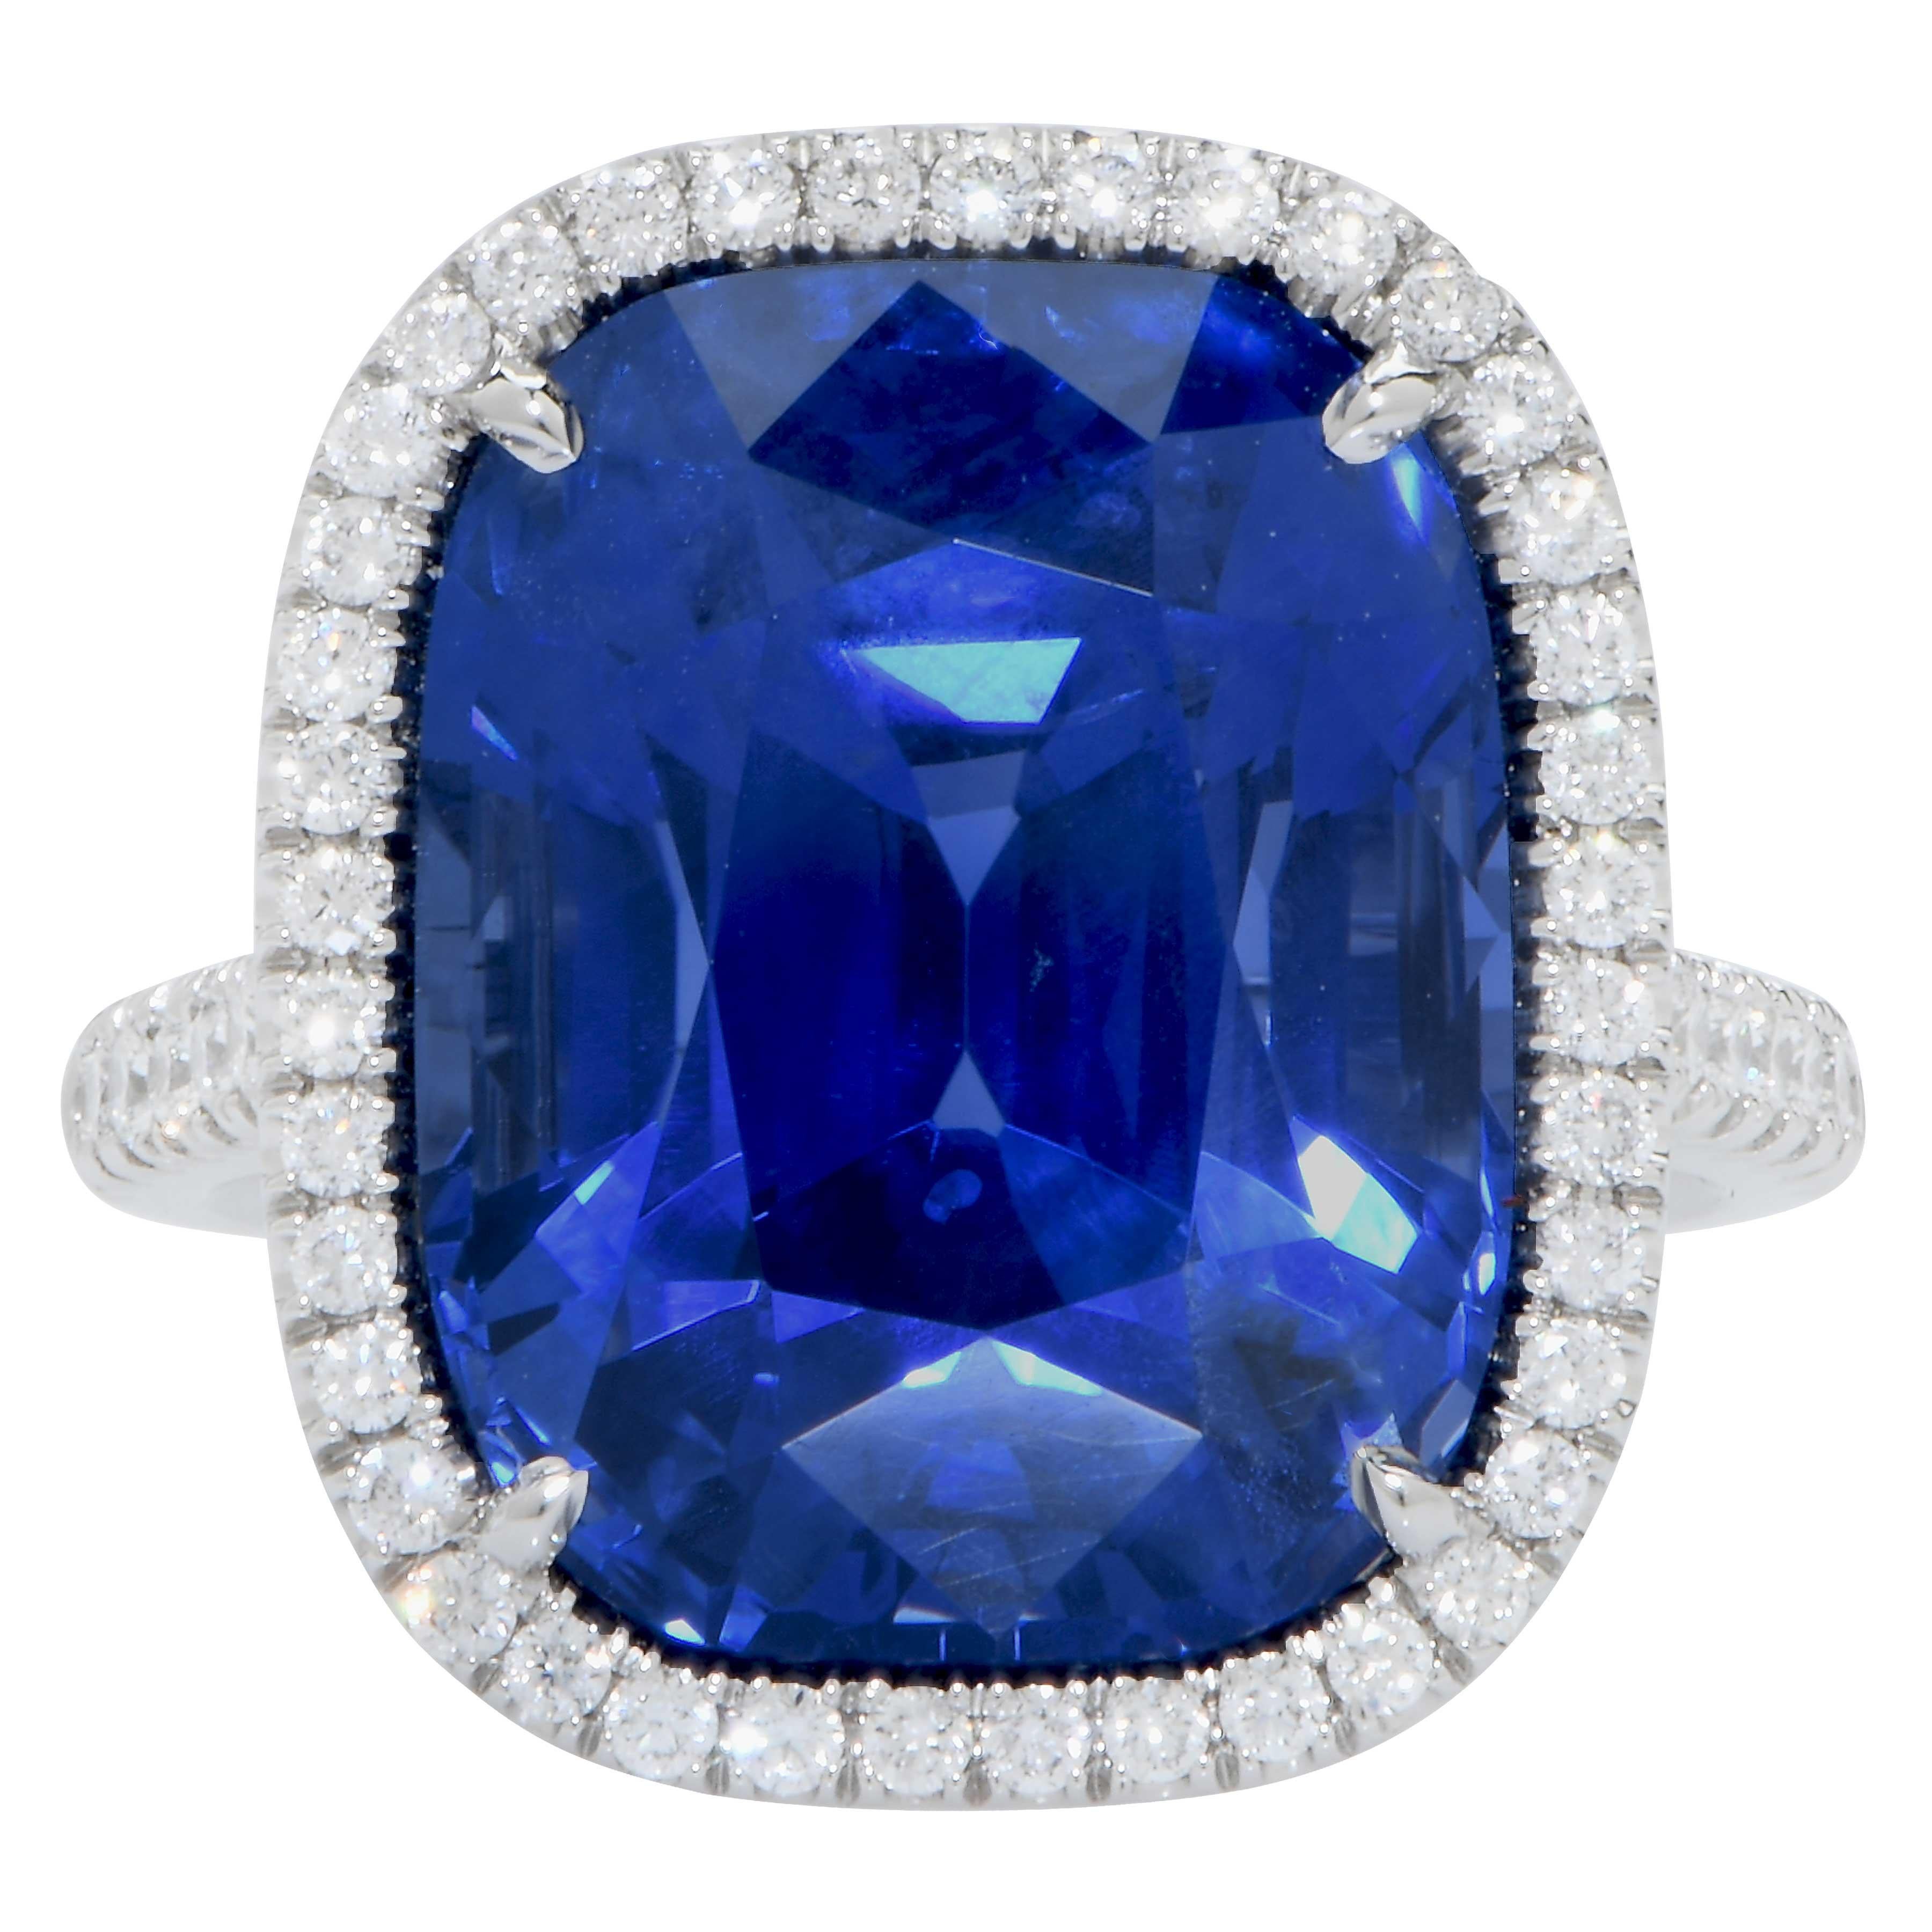 Important Cushion Cut 20.43 Carat Ceylon Sapphire AGL Graded No Heat Diamond Ring.
This beautiful hand made ring features a gorgeous Ceylon sapphire AGL graded to mention No Heat treatment.
Ring Size 6.5
Metal: Platinum
Metal Weight:14.5 Grams